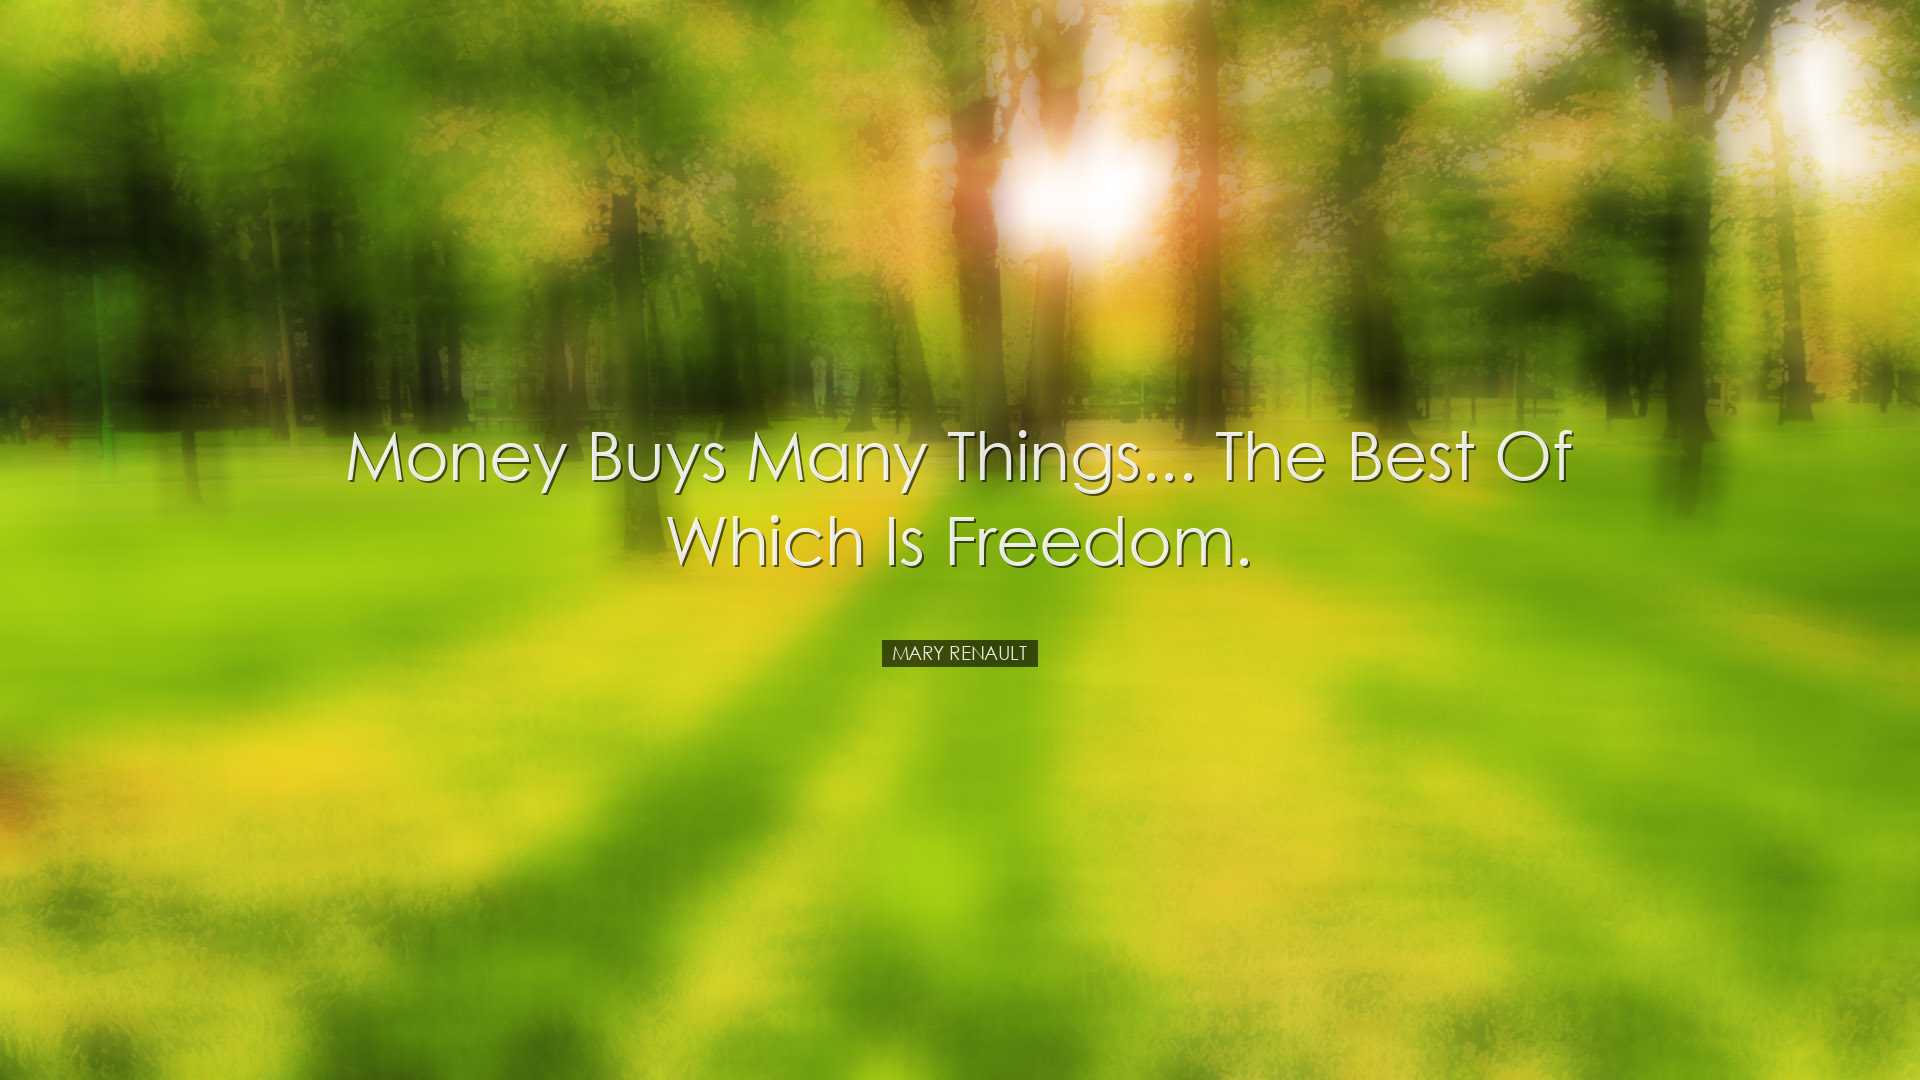 Money buys many things... The best of which is freedom. - Mary Ren